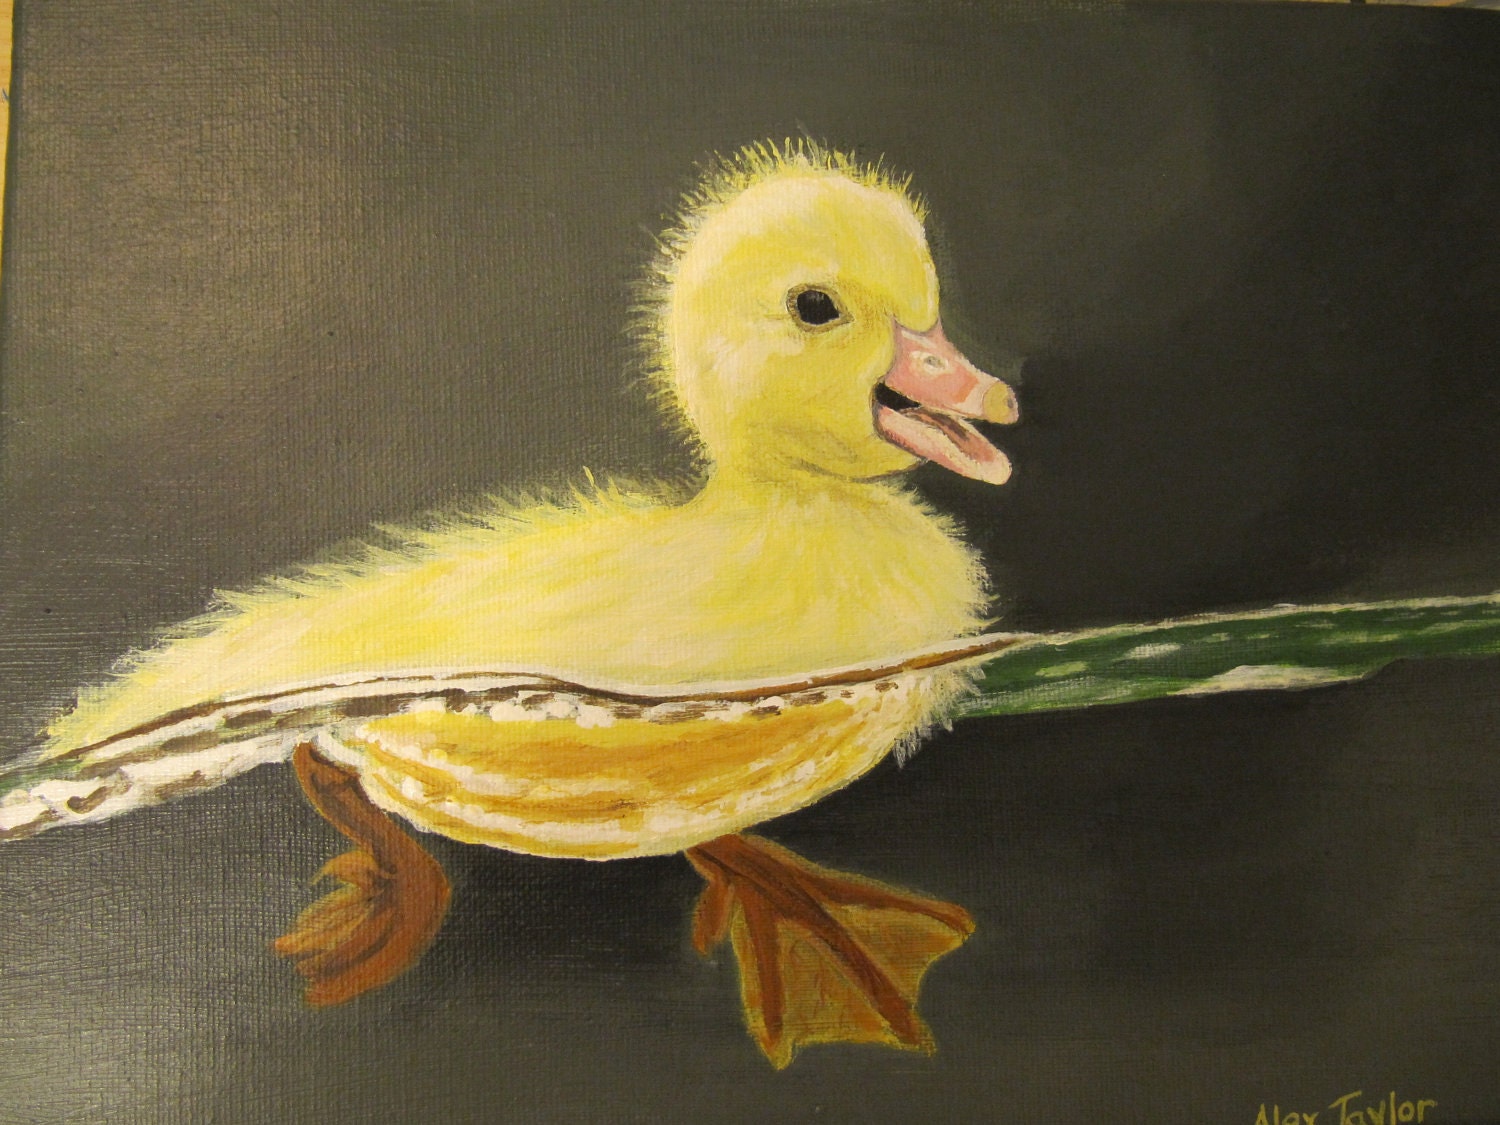 Baby duck's first swim-original acrylic painting on canvas 9"x12" - alextaylor1